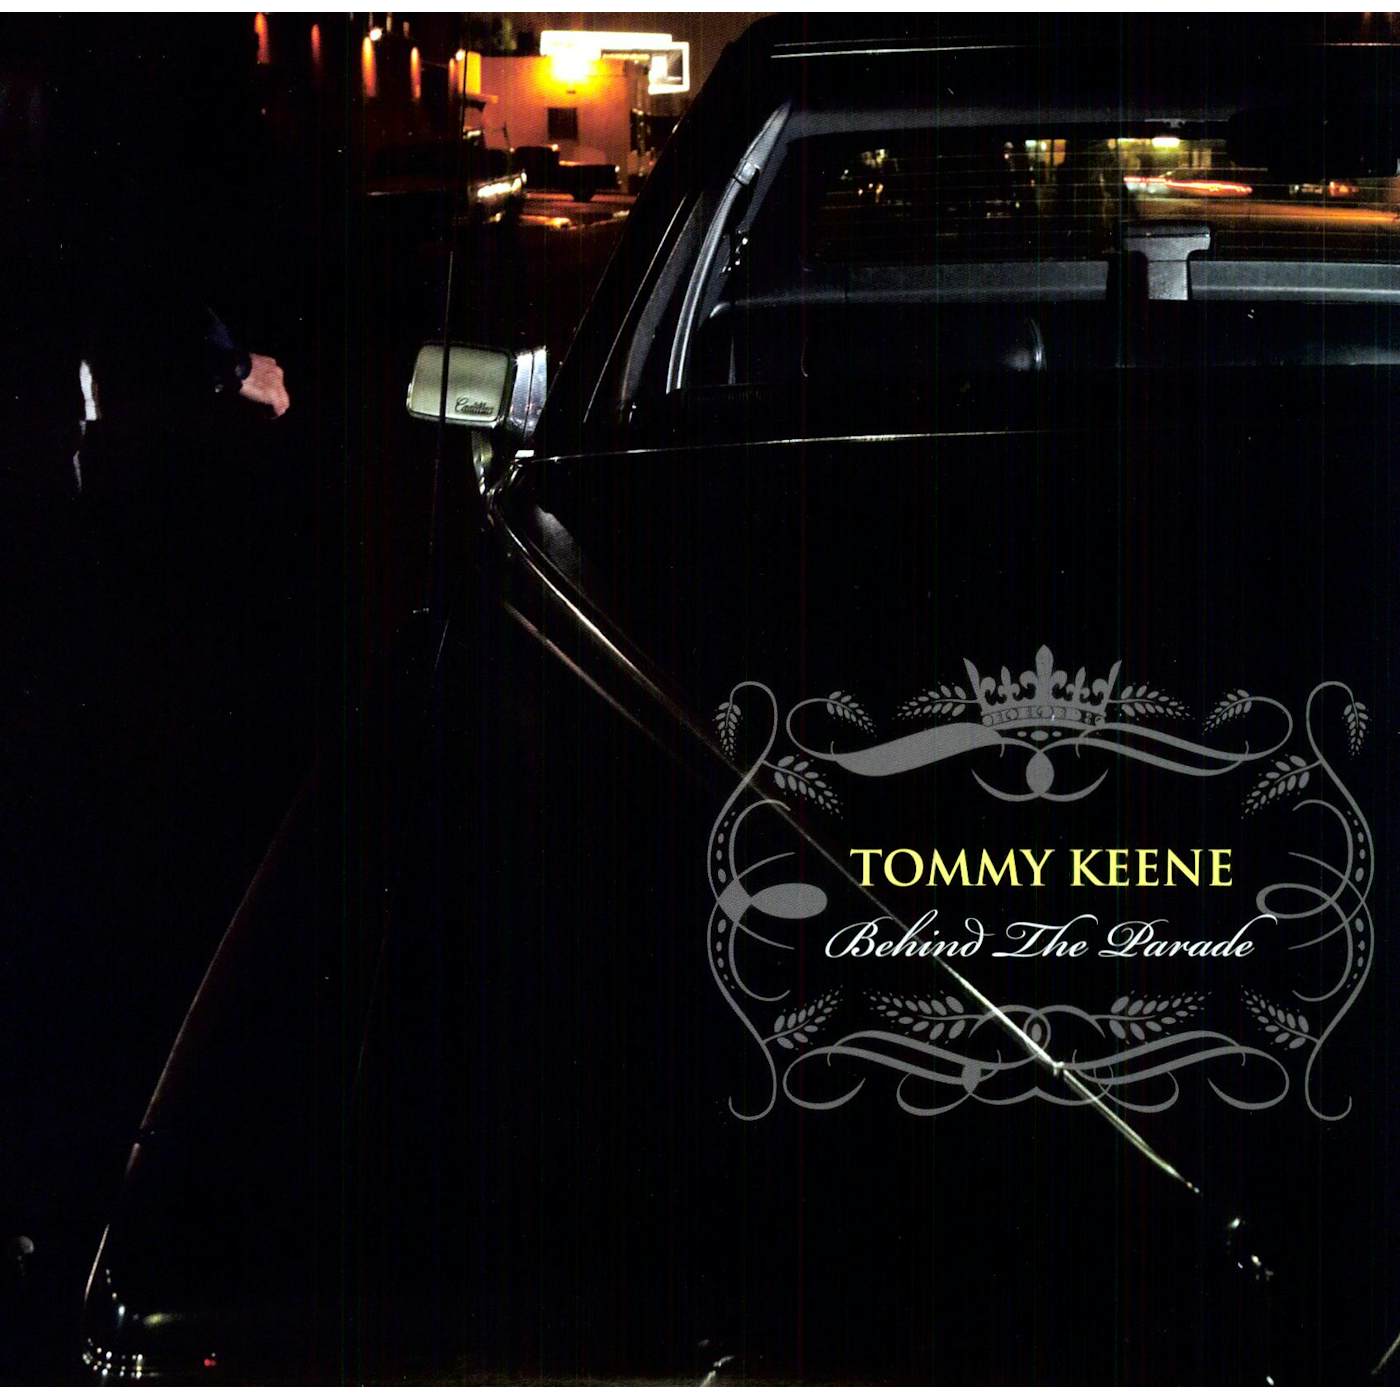 Tommy Keene Behind The Parade Vinyl Record